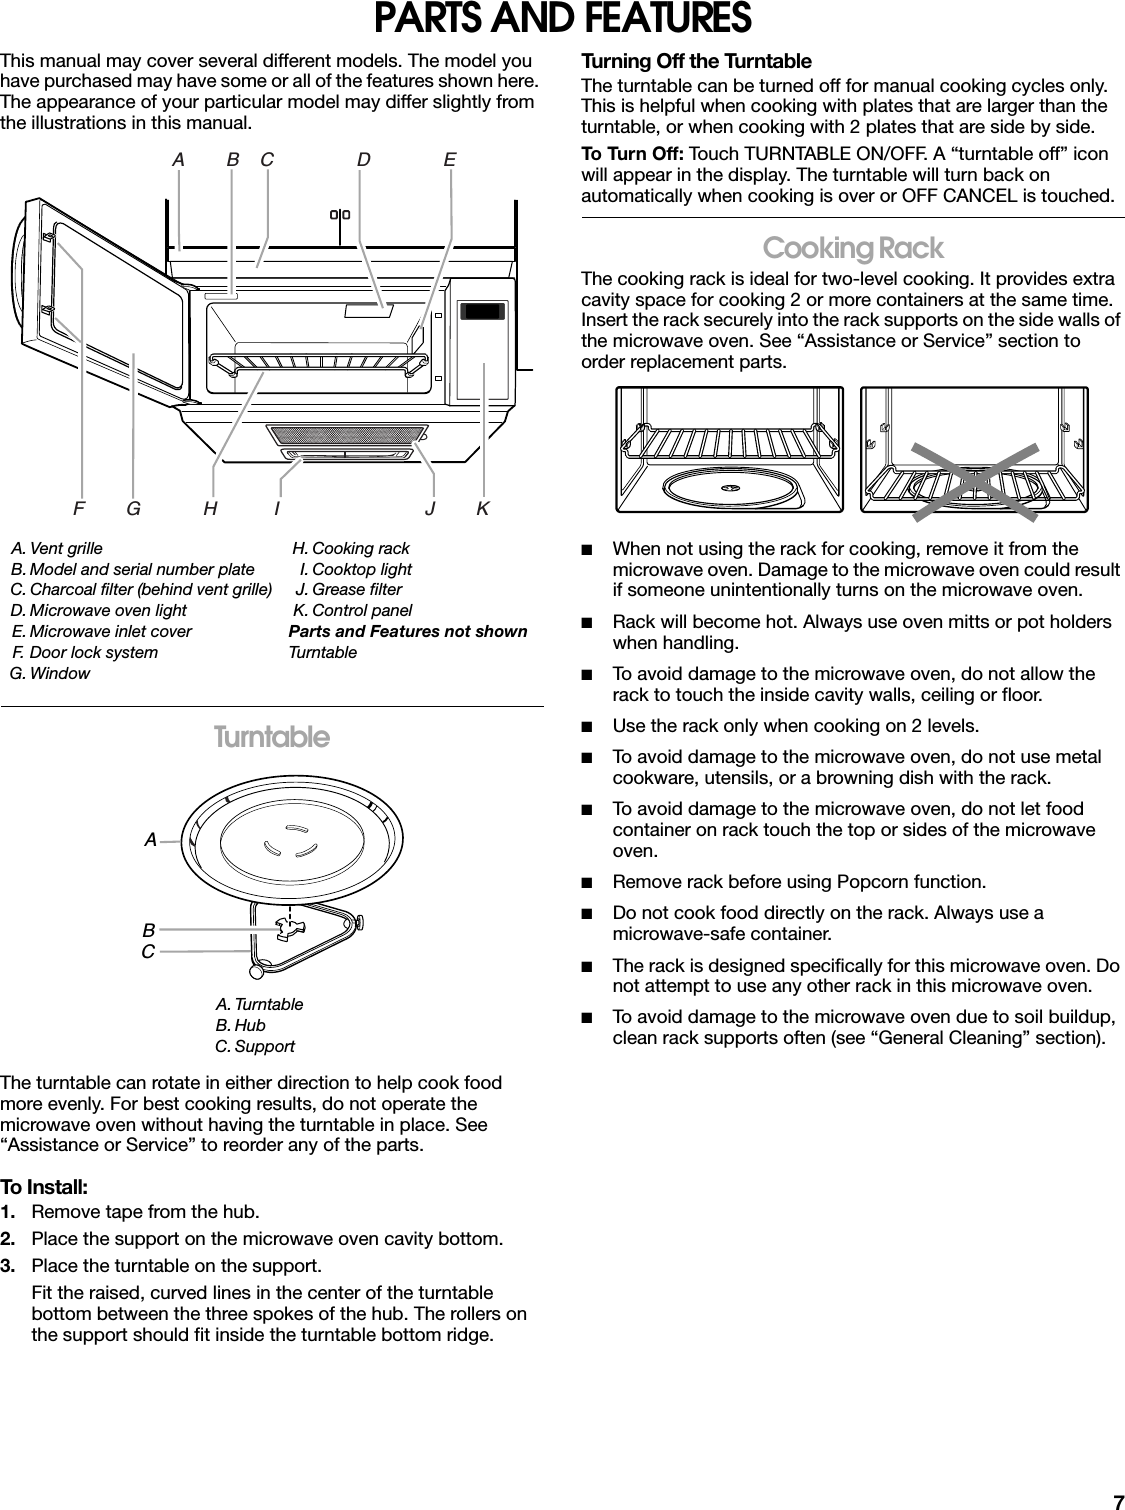 7PARTS AND FEATURESThis manual may cover several different models. The model you have purchased may have some or all of the features shown here. The appearance of your particular model may differ slightly from the illustrations in this manual.TurntableThe turntable can rotate in either direction to help cook food more evenly. For best cooking results, do not operate the microwave oven without having the turntable in place. See “Assistance or Service” to reorder any of the parts.To Install:1. Remove tape from the hub.2. Place the support on the microwave oven cavity bottom.3. Place the turntable on the support.Fit the raised, curved lines in the center of the turntable bottom between the three spokes of the hub. The rollers on the support should fit inside the turntable bottom ridge.Turning Off the TurntableThe turntable can be turned off for manual cooking cycles only. This is helpful when cooking with plates that are larger than the turntable, or when cooking with 2 plates that are side by side.To Turn Off: Touch TURNTABLE ON/OFF. A “turntable off” icon will appear in the display. The turntable will turn back on automatically when cooking is over or OFF CANCEL is touched.Cooking RackThe cooking rack is ideal for two-level cooking. It provides extra cavity space for cooking 2 or more containers at the same time. Insert the rack securely into the rack supports on the side walls of the microwave oven. See “Assistance or Service” section to order replacement parts.■When not using the rack for cooking, remove it from the microwave oven. Damage to the microwave oven could result if someone unintentionally turns on the microwave oven.■Rack will become hot. Always use oven mitts or pot holders when handling.■To avoid damage to the microwave oven, do not allow the rack to touch the inside cavity walls, ceiling or floor.■Use the rack only when cooking on 2 levels.■To avoid damage to the microwave oven, do not use metal cookware, utensils, or a browning dish with the rack.■To avoid damage to the microwave oven, do not let food container on rack touch the top or sides of the microwave oven.■Remove rack before using Popcorn function.■Do not cook food directly on the rack. Always use a microwave-safe container.■The rack is designed specifically for this microwave oven. Do not attempt to use any other rack in this microwave oven.■To avoid damage to the microwave oven due to soil buildup, clean rack supports often (see “General Cleaning” section).A. Vent grilleB. Model and serial number plateC. Charcoal filter (behind vent grille)D. Microwave oven lightE. Microwave inlet coverF. Door lock systemG. WindowH. Cooking rackI. Cooktop lightJ. Grease filterK. Control panelParts and Features not shownTurntableA. TurntableB. HubC. SupportA        B    C                D              EF        G            H           I                            J        KABC